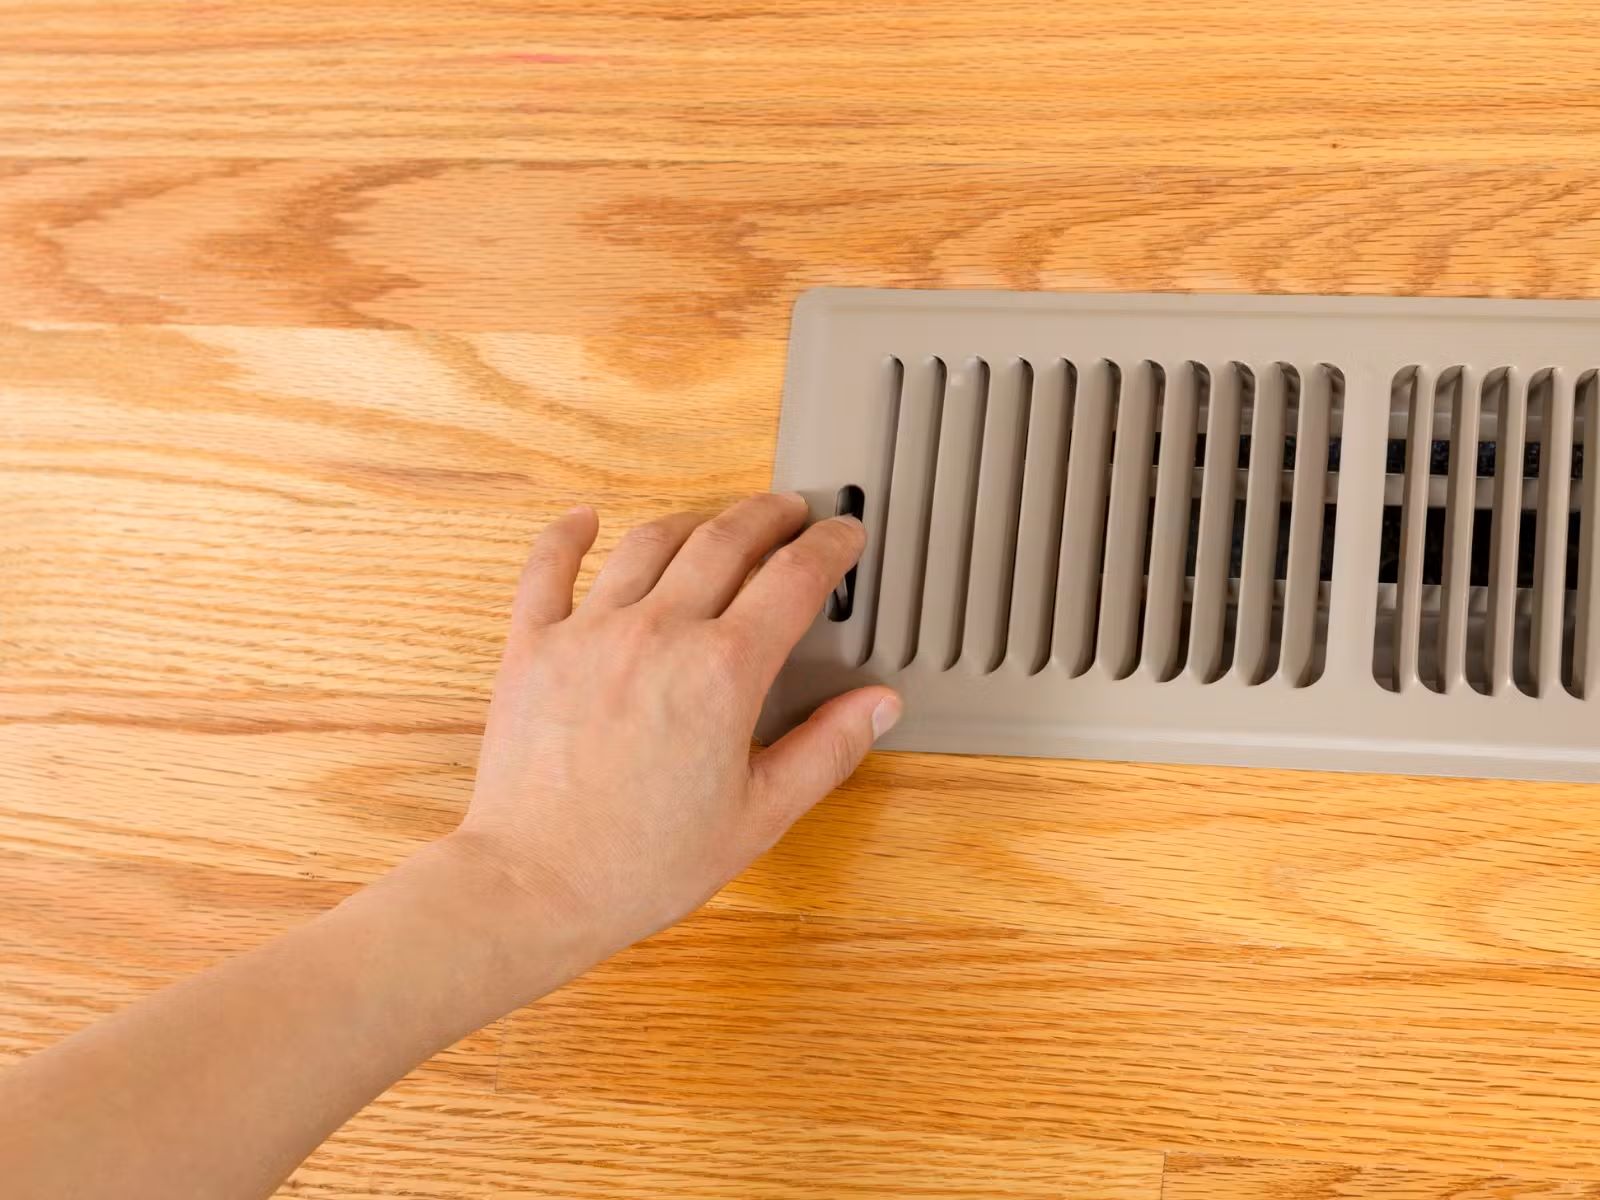 How Do I Childproof My Floor Vents?